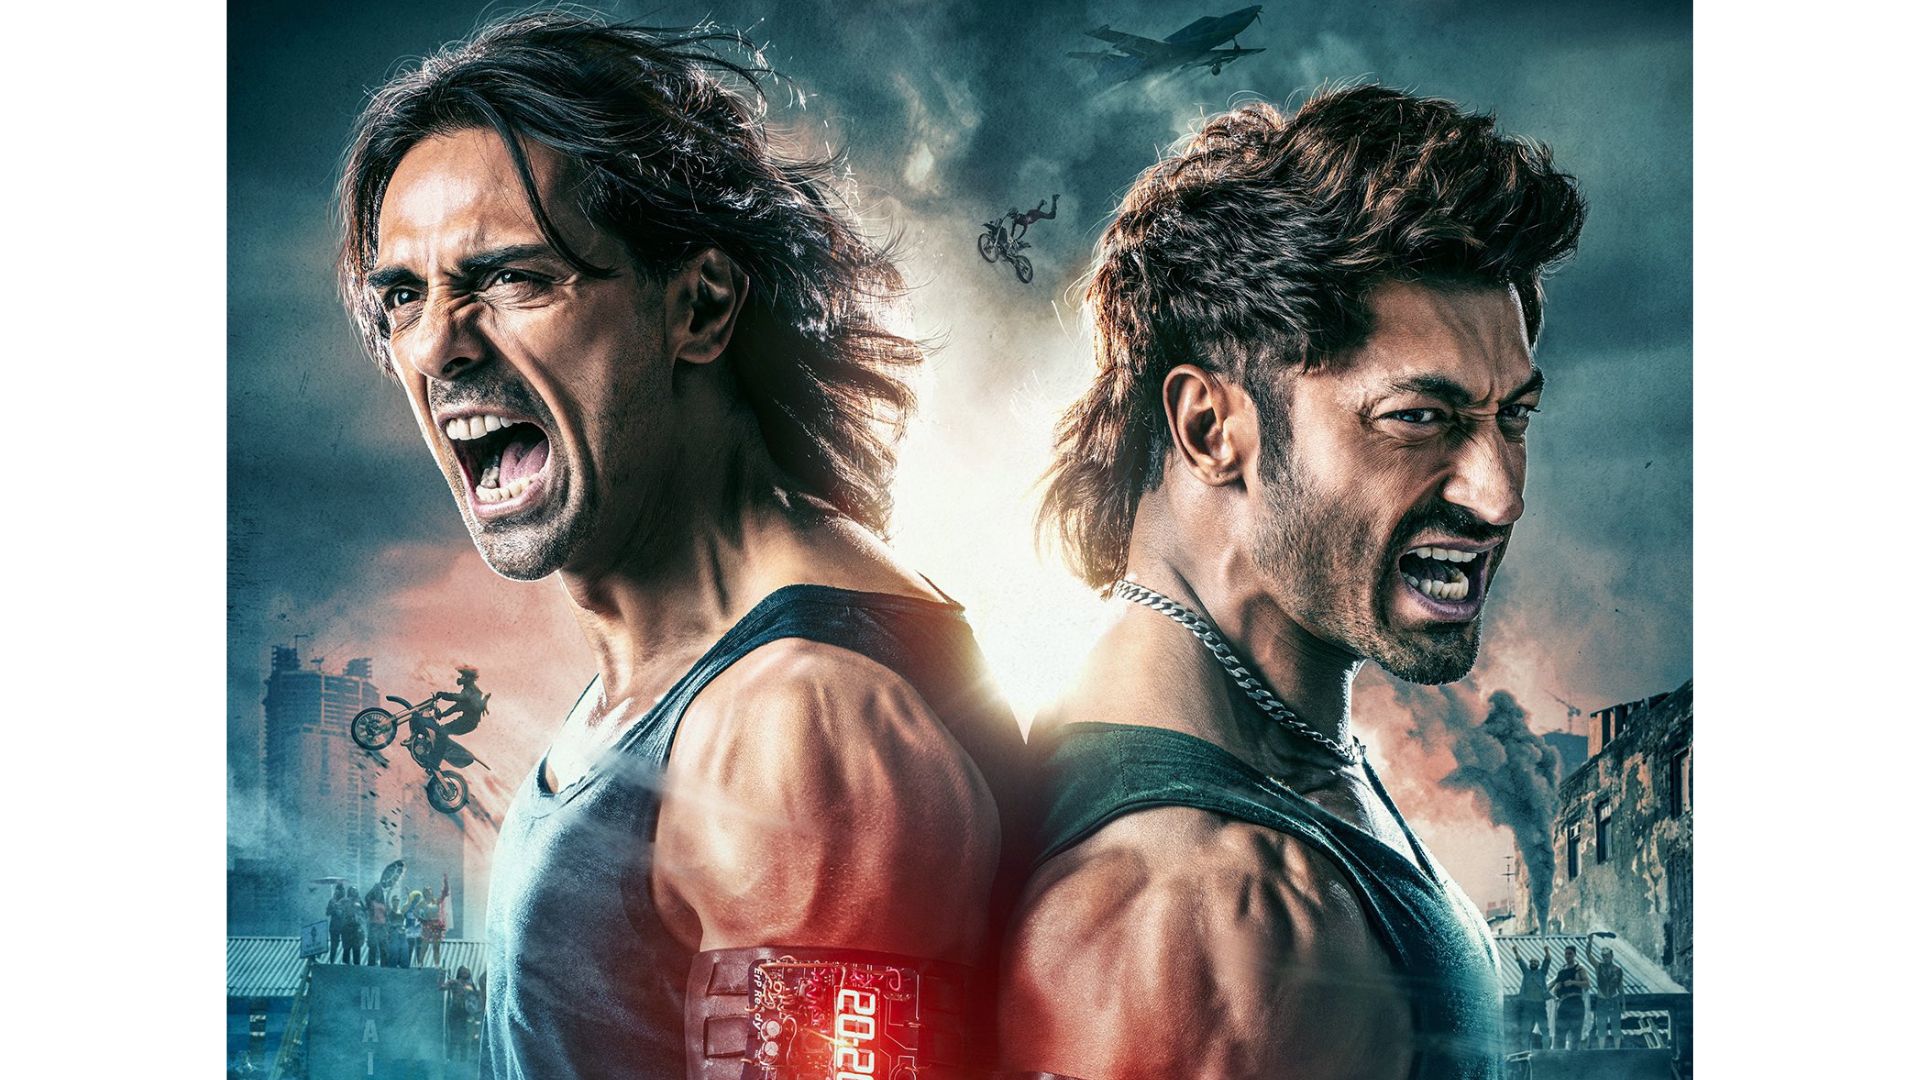 Crakk Movie Review: Vidyut Jammwal is a great action hero in every way.